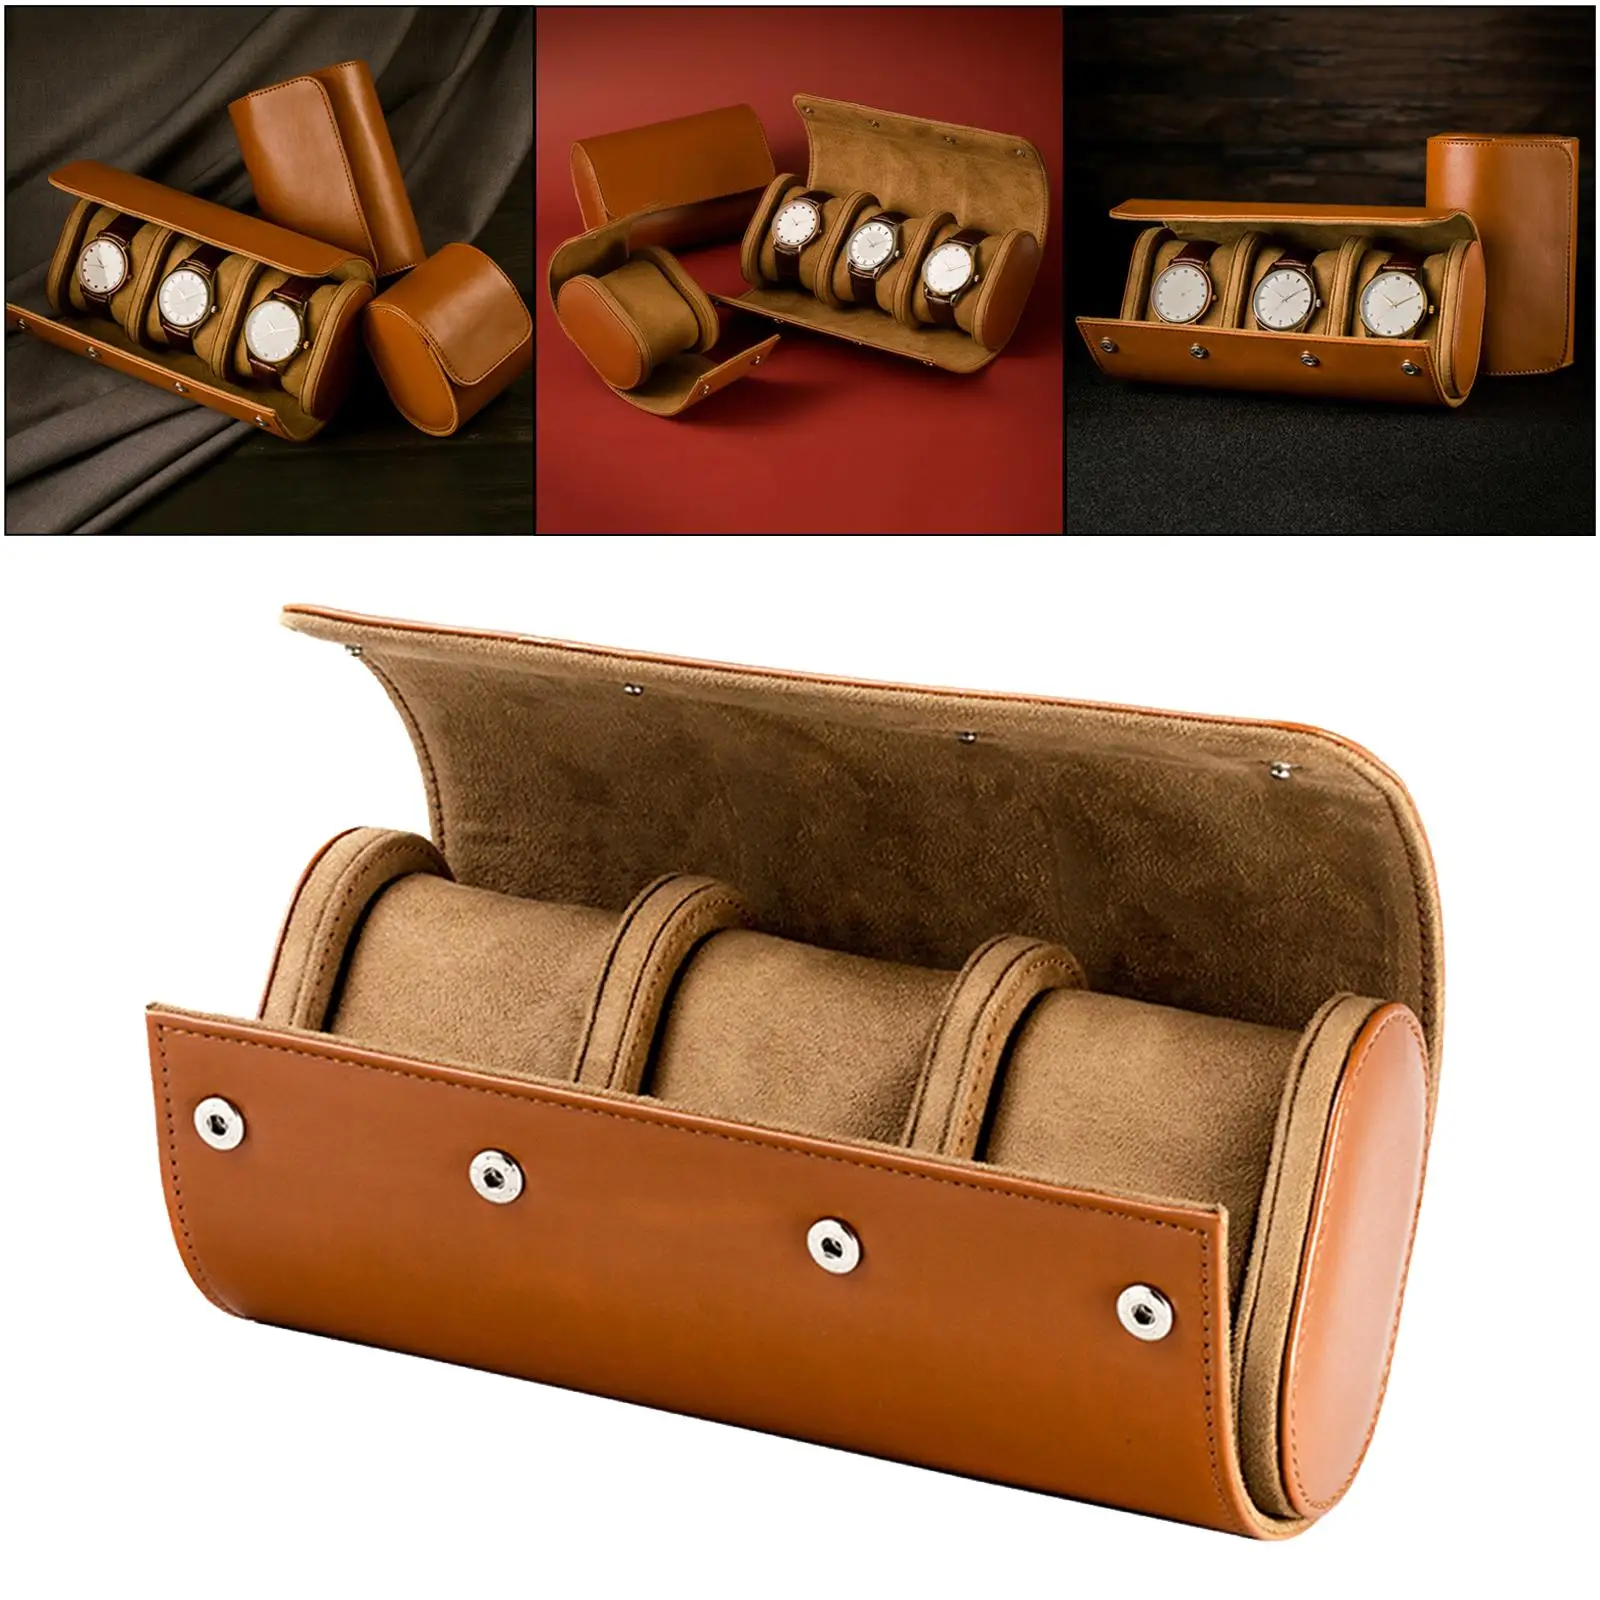 PU Leather Watch Box Organizer with Removable - Jewelry Display & Storage Container Holder